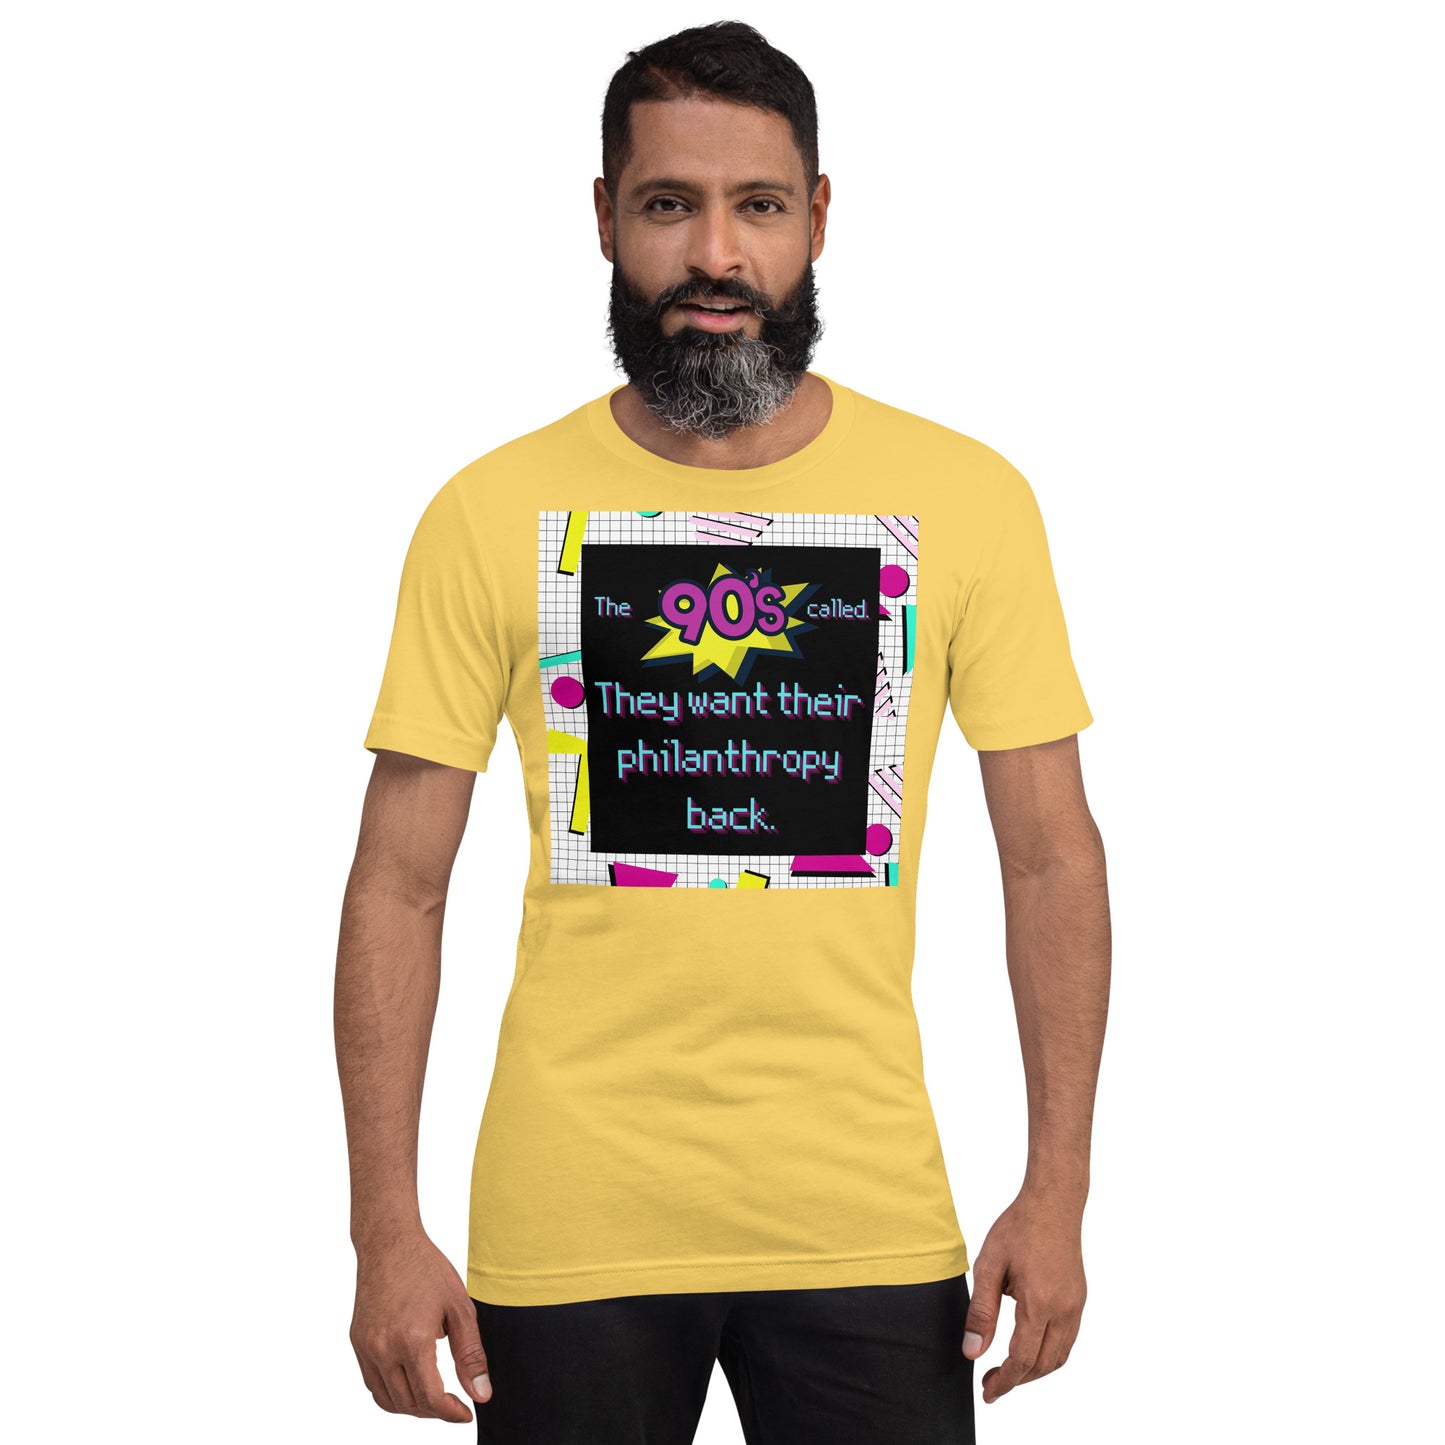 The 90's Wants Their Philanthropy Back Unisex t-shirt